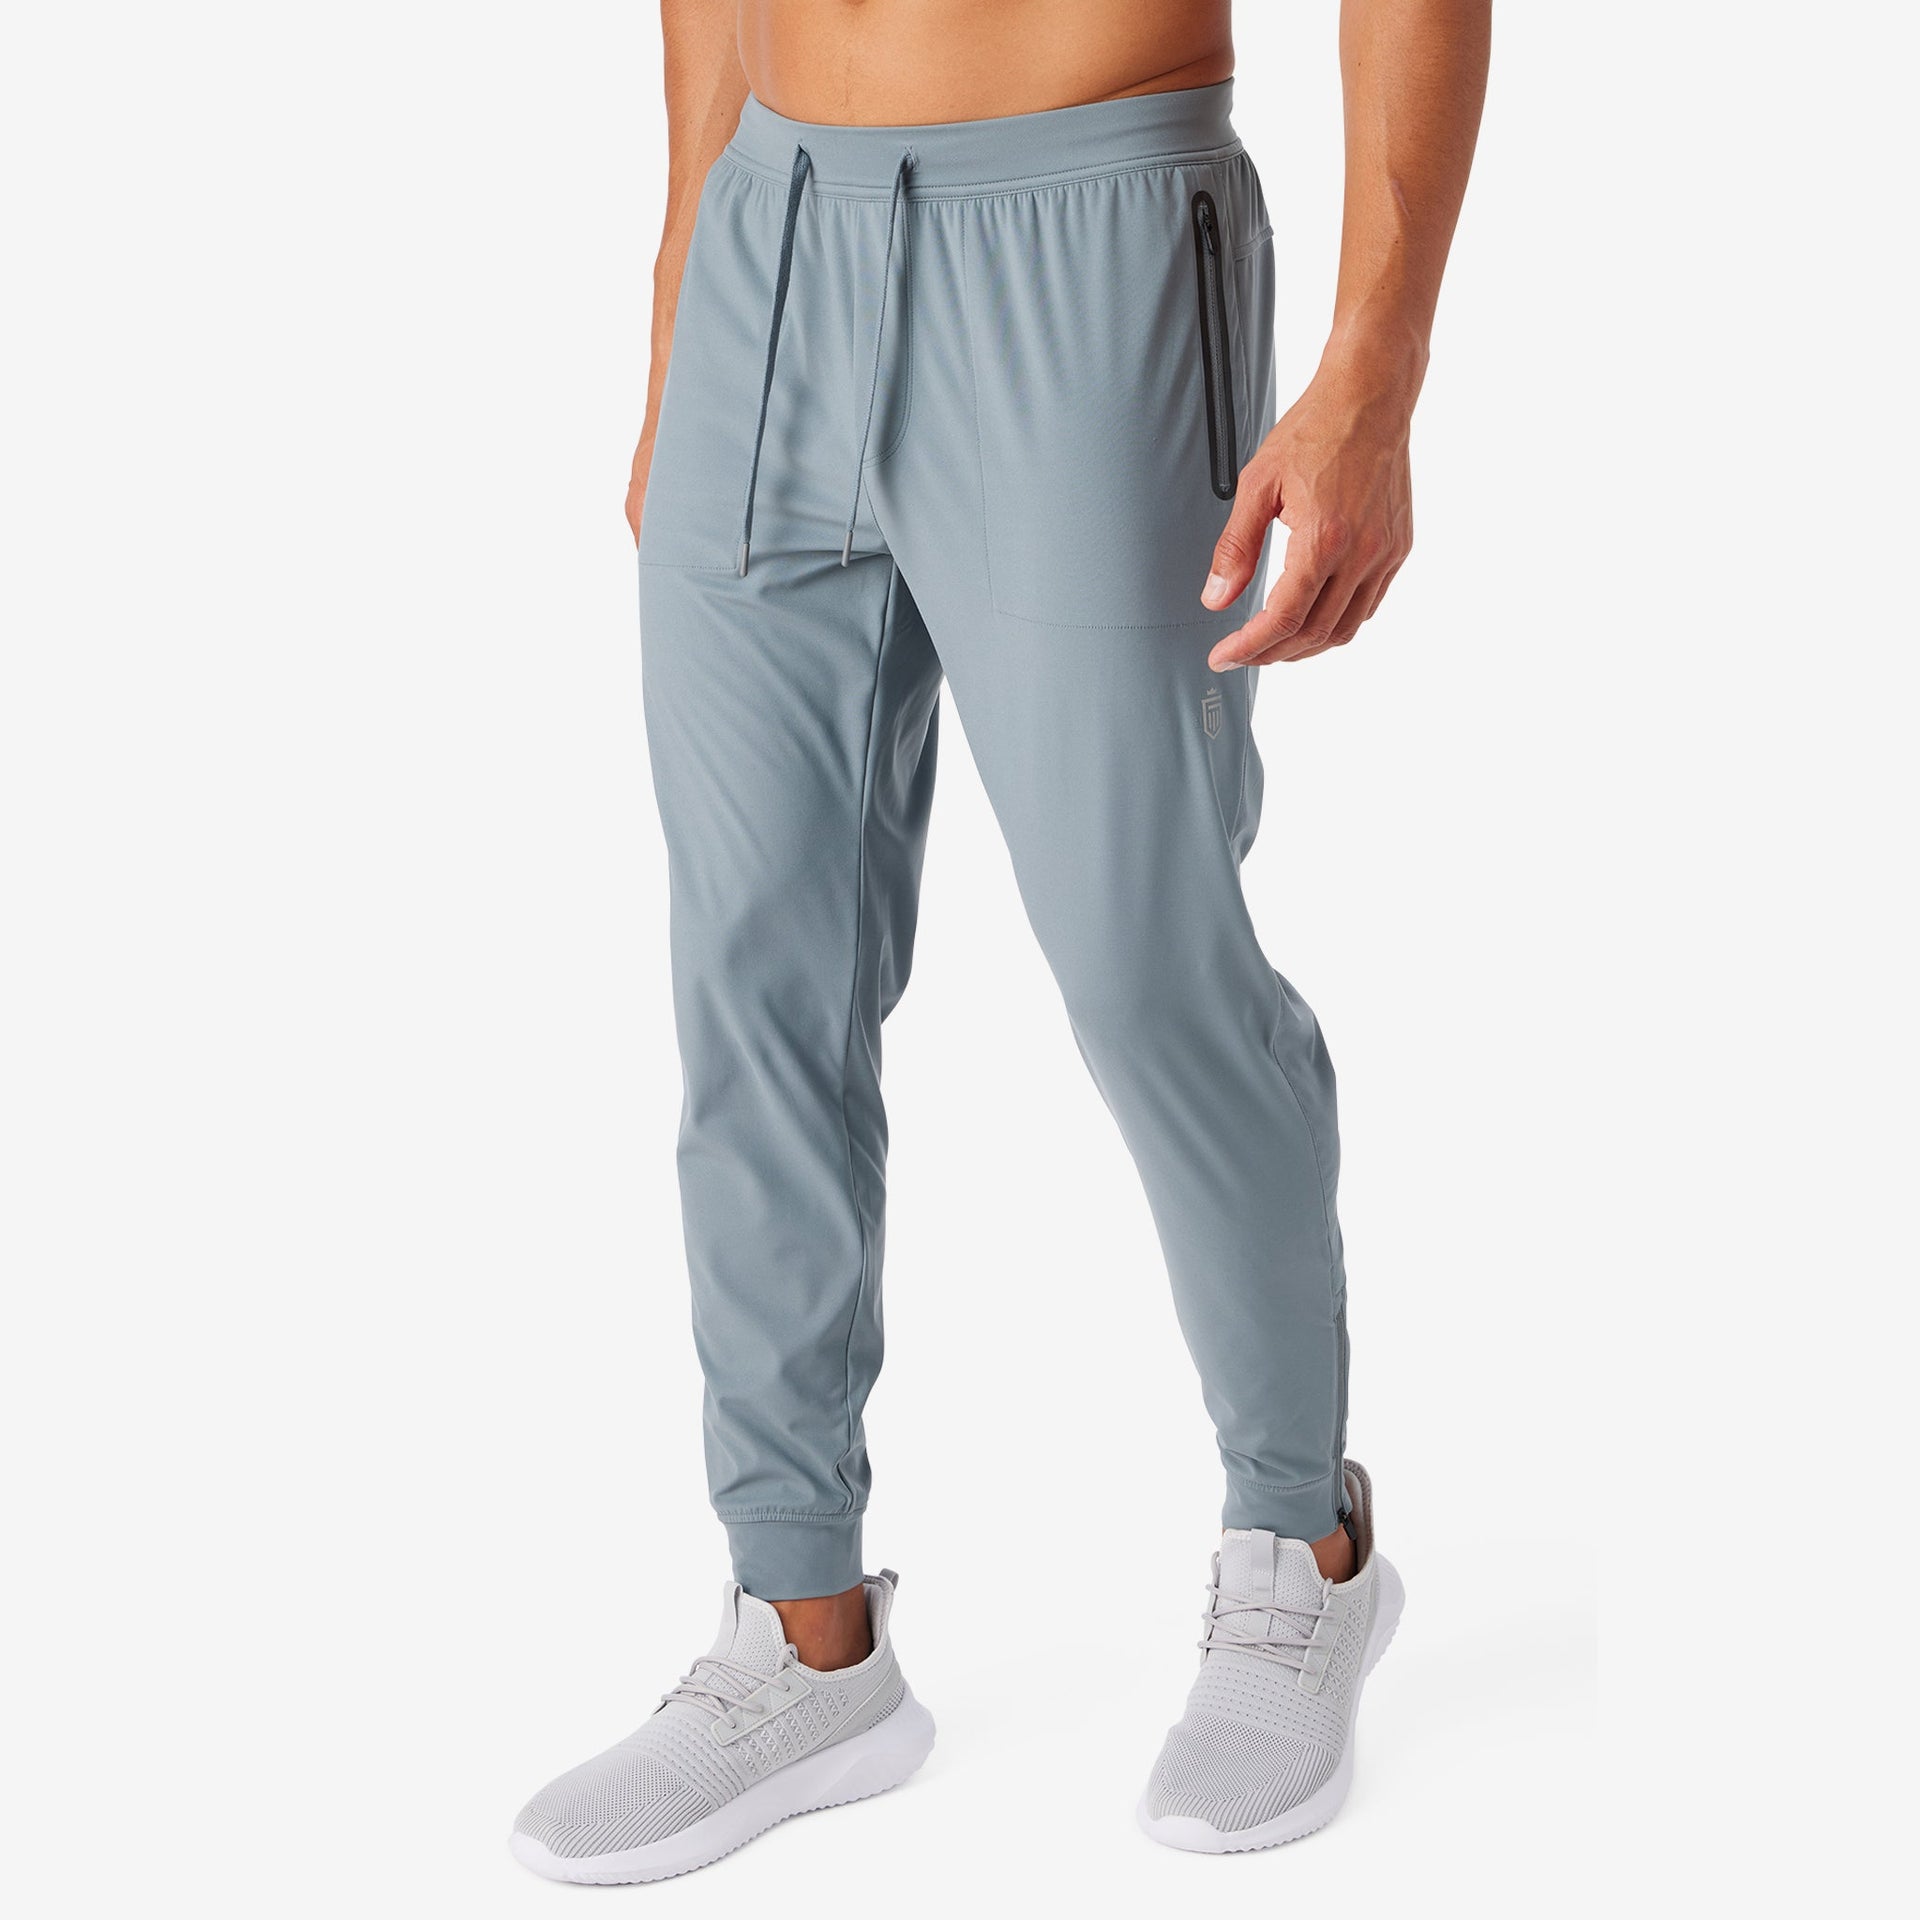 lululemon athletica License To Train High-rise Pants in Blue